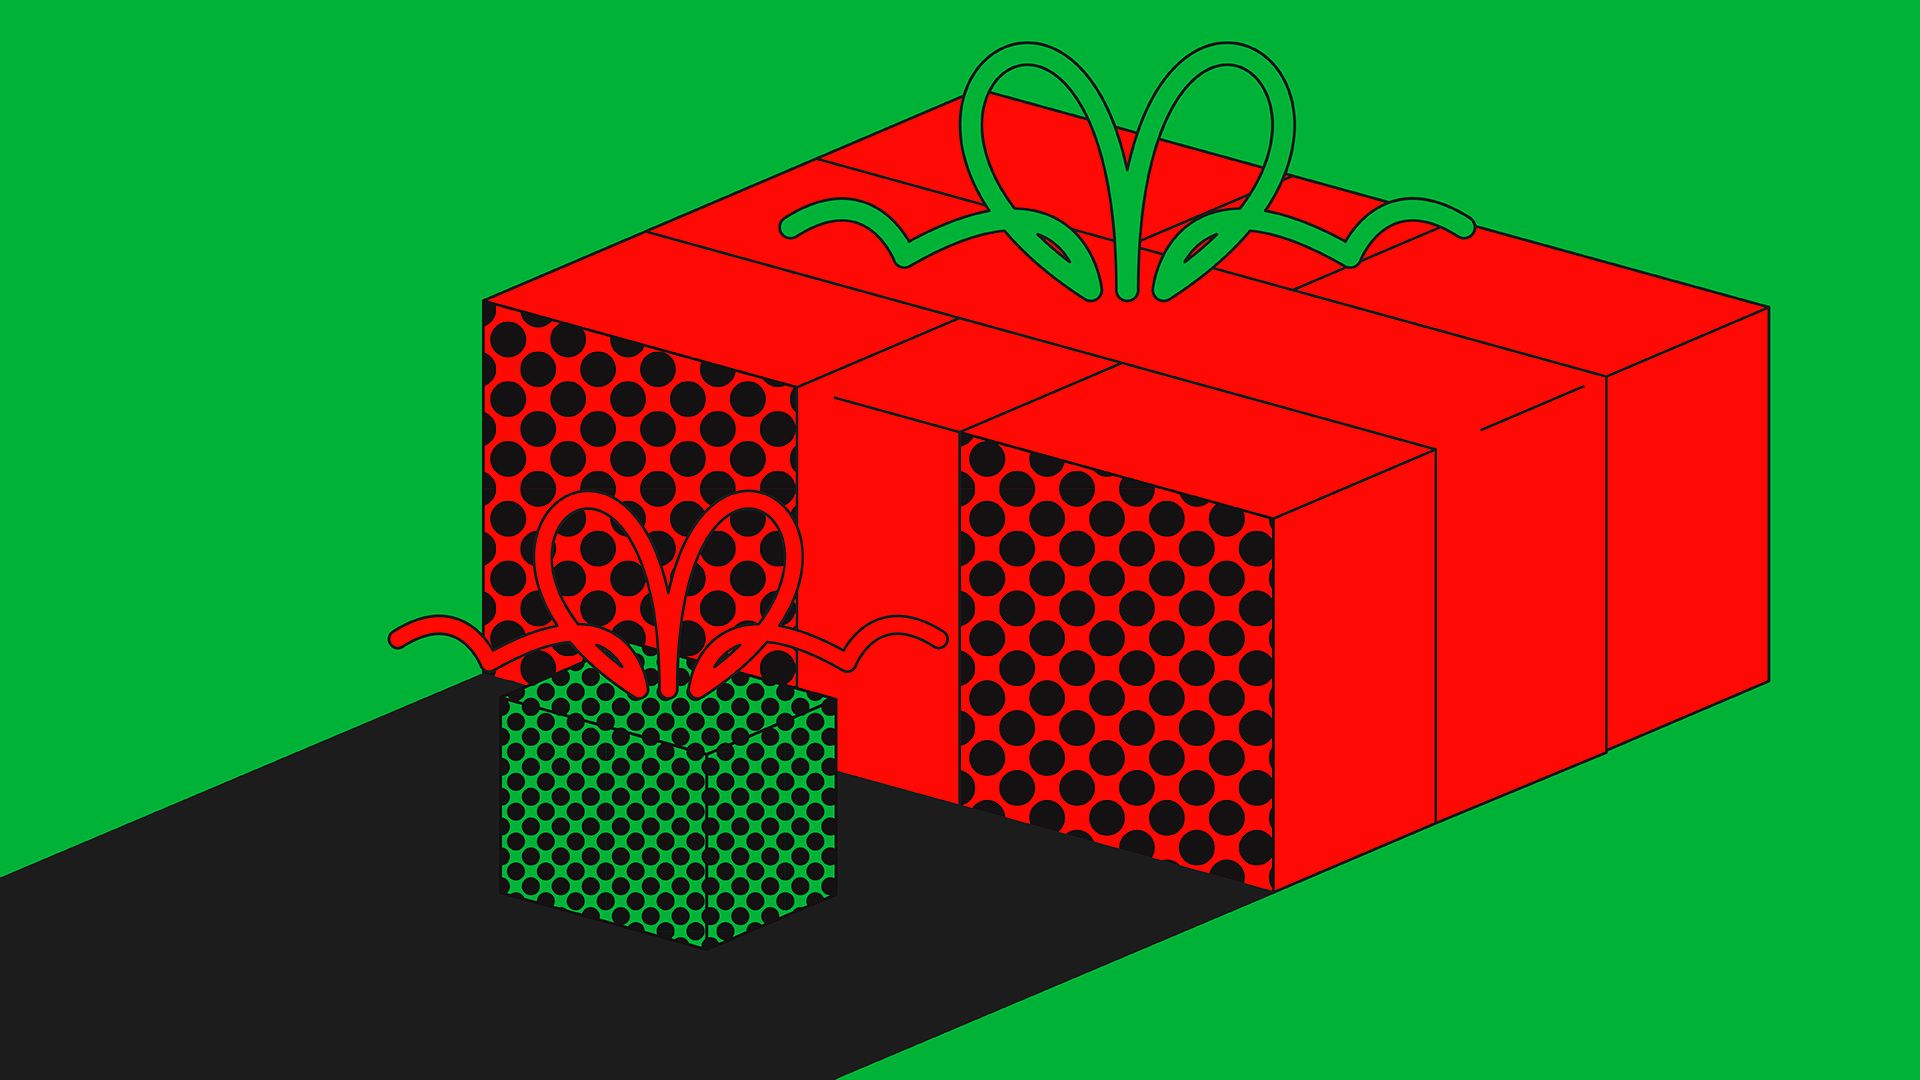 Gift Giving - How to Know if It Is Appropriate And/or Expected?